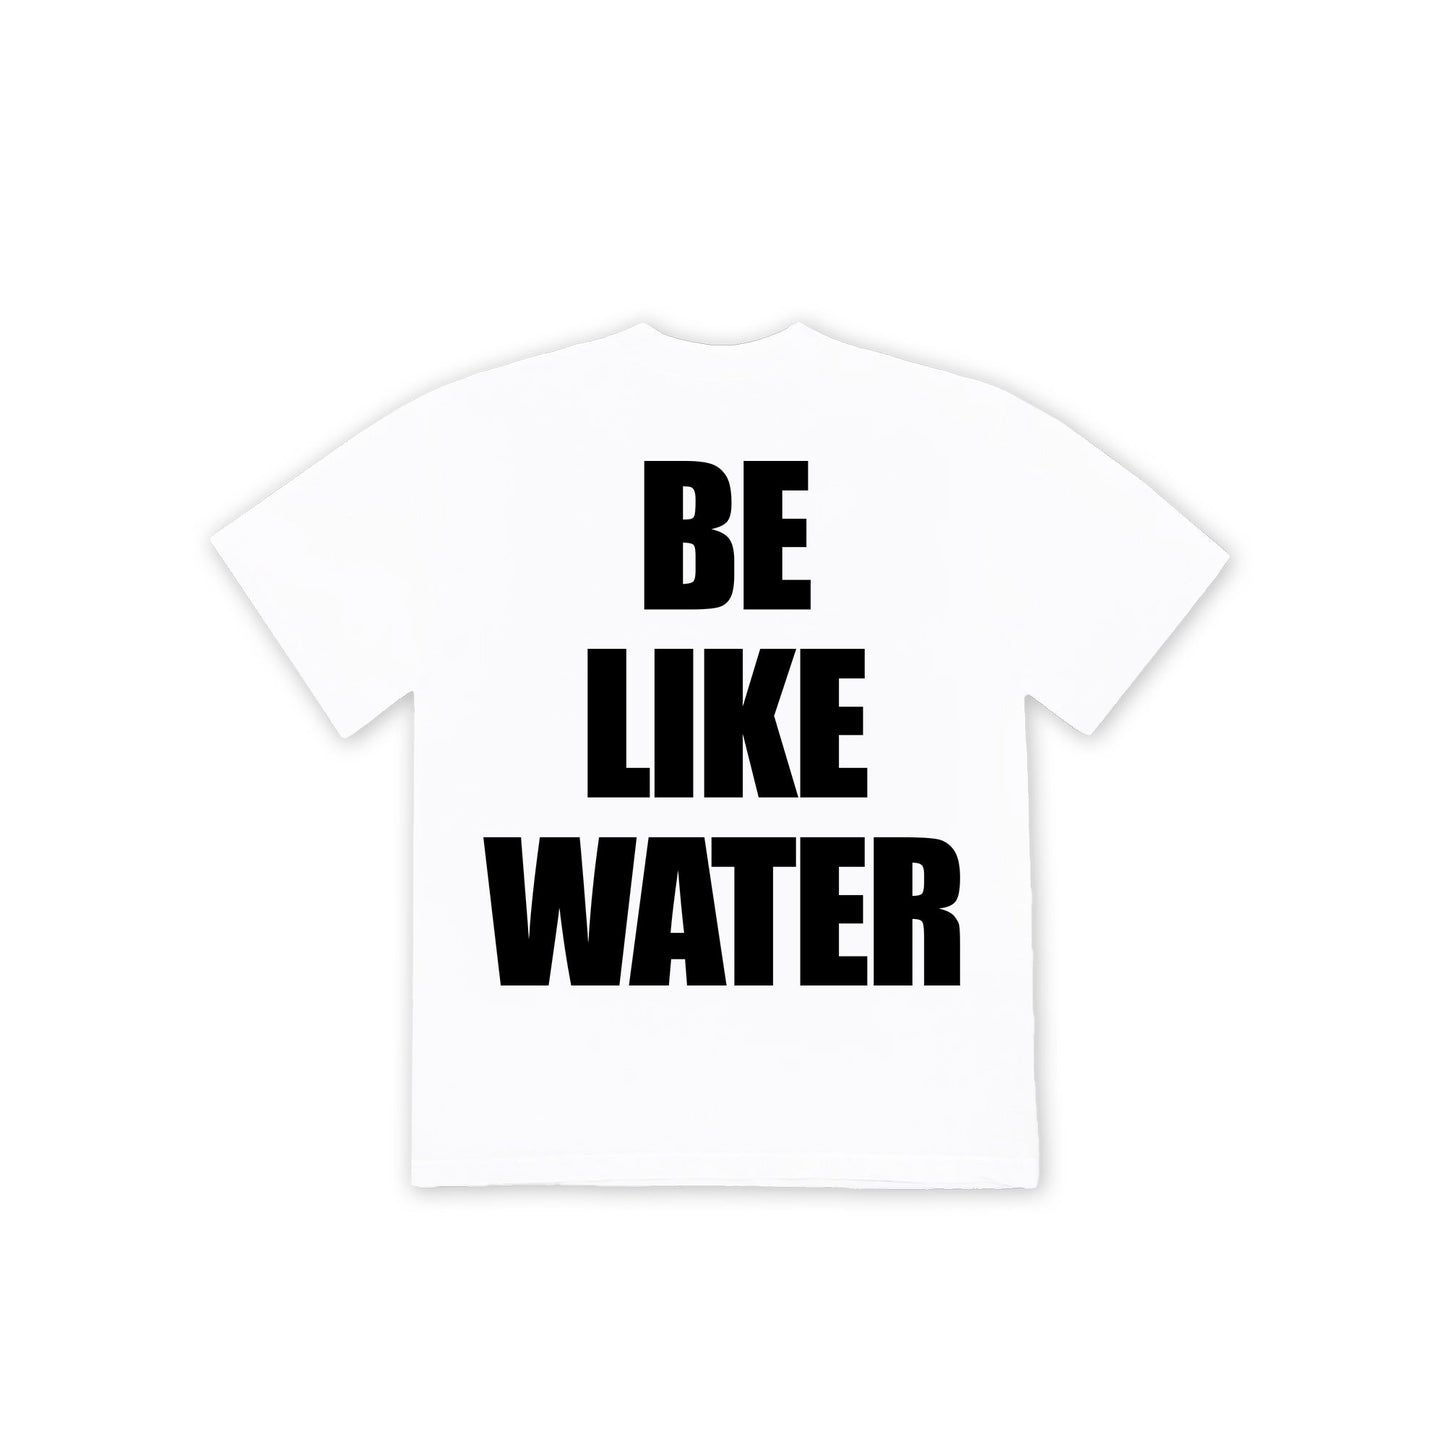 EARLY ACCESS: UNCIVILIZED "BE LIKE WATER" T-SHIRT